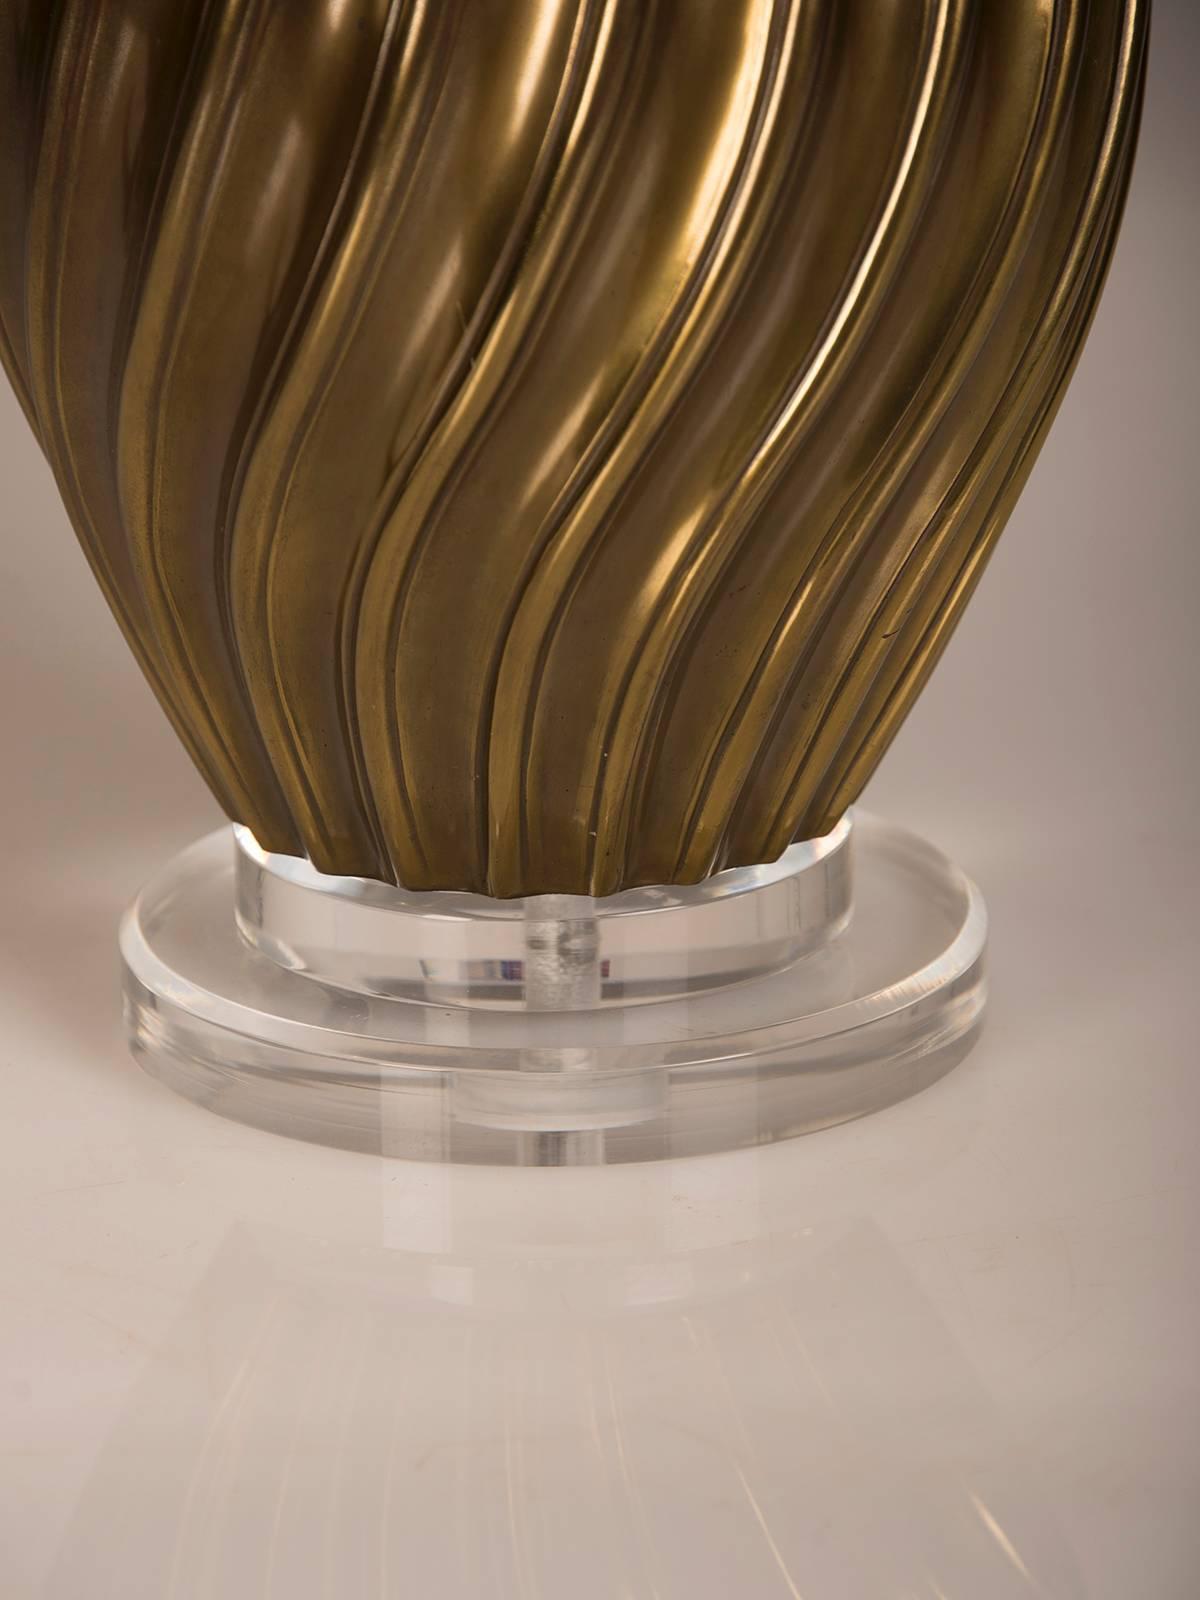 Pair of Italian Vintage Brass Swirl Vases Mounted as Custom Lamps, circa 1950 For Sale 1